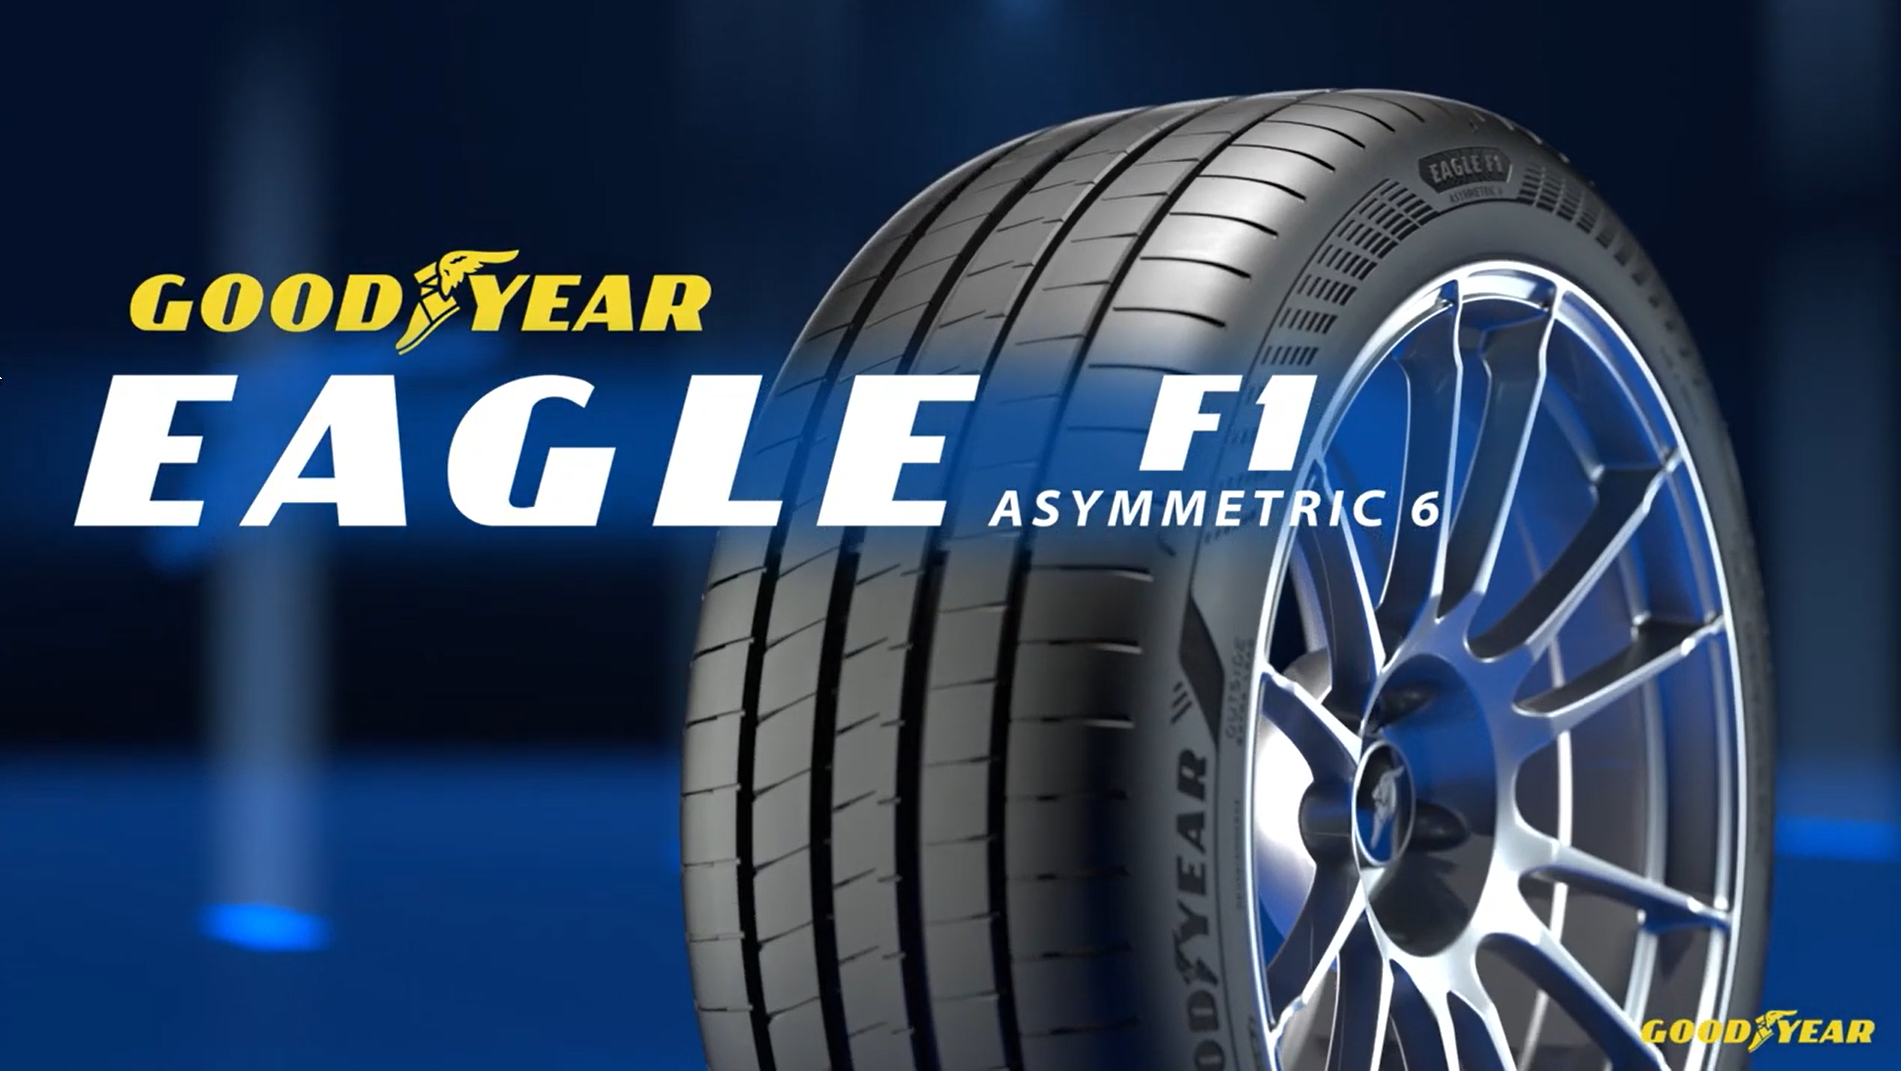 2022 02 18 14 54 21 Goodyear Eagle F1 Asymmetric 6 with Excellent Wet Braking Technology You Tube